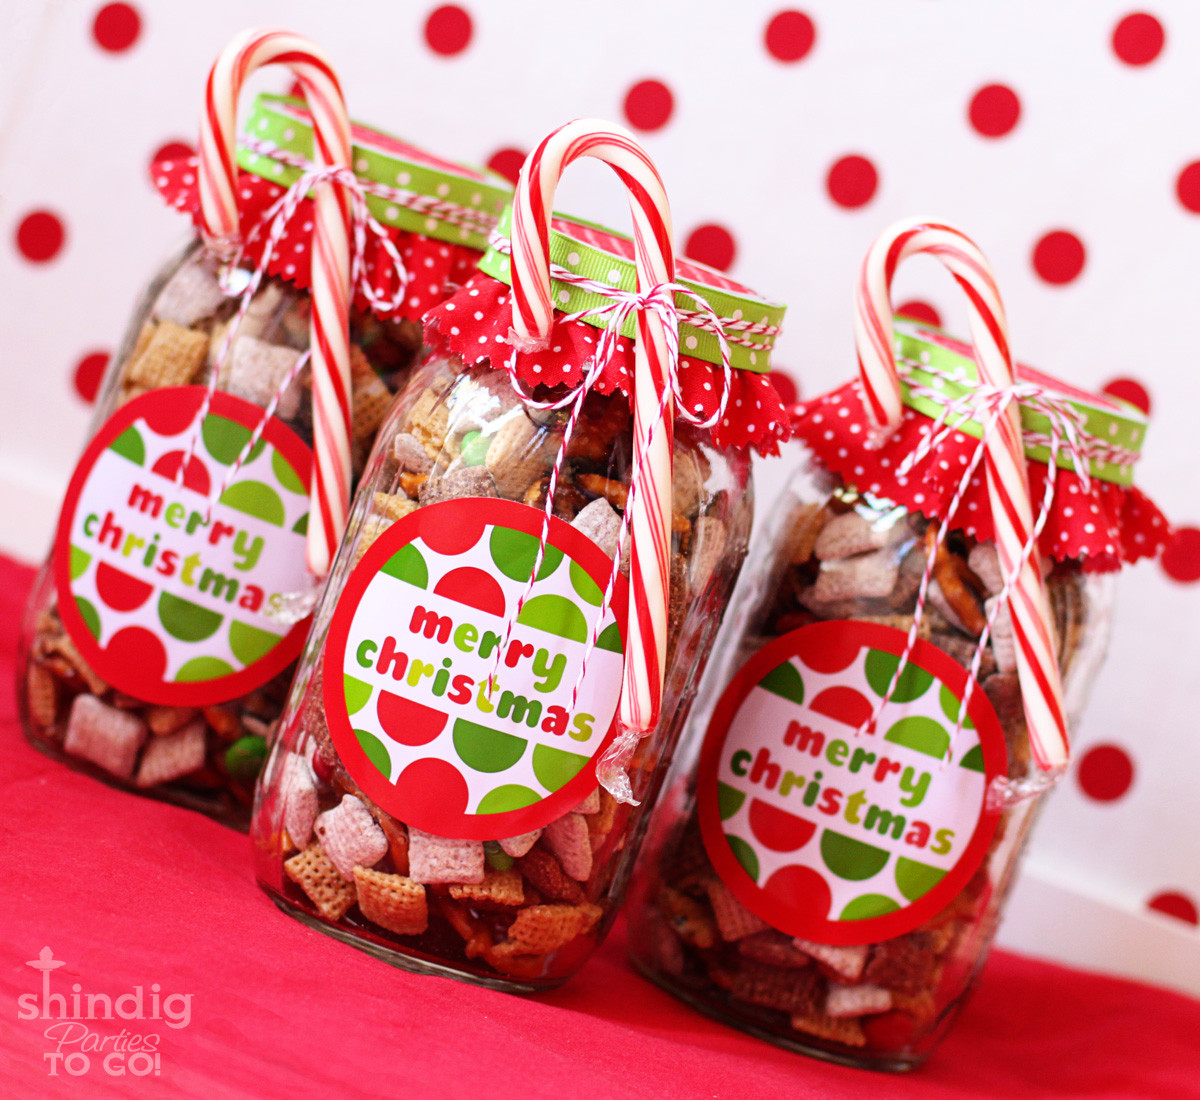 Homemade Christmas Candy Gift Ideas
 How To Make Handmade Chex Mix Holiday Gifts & Bonus Free